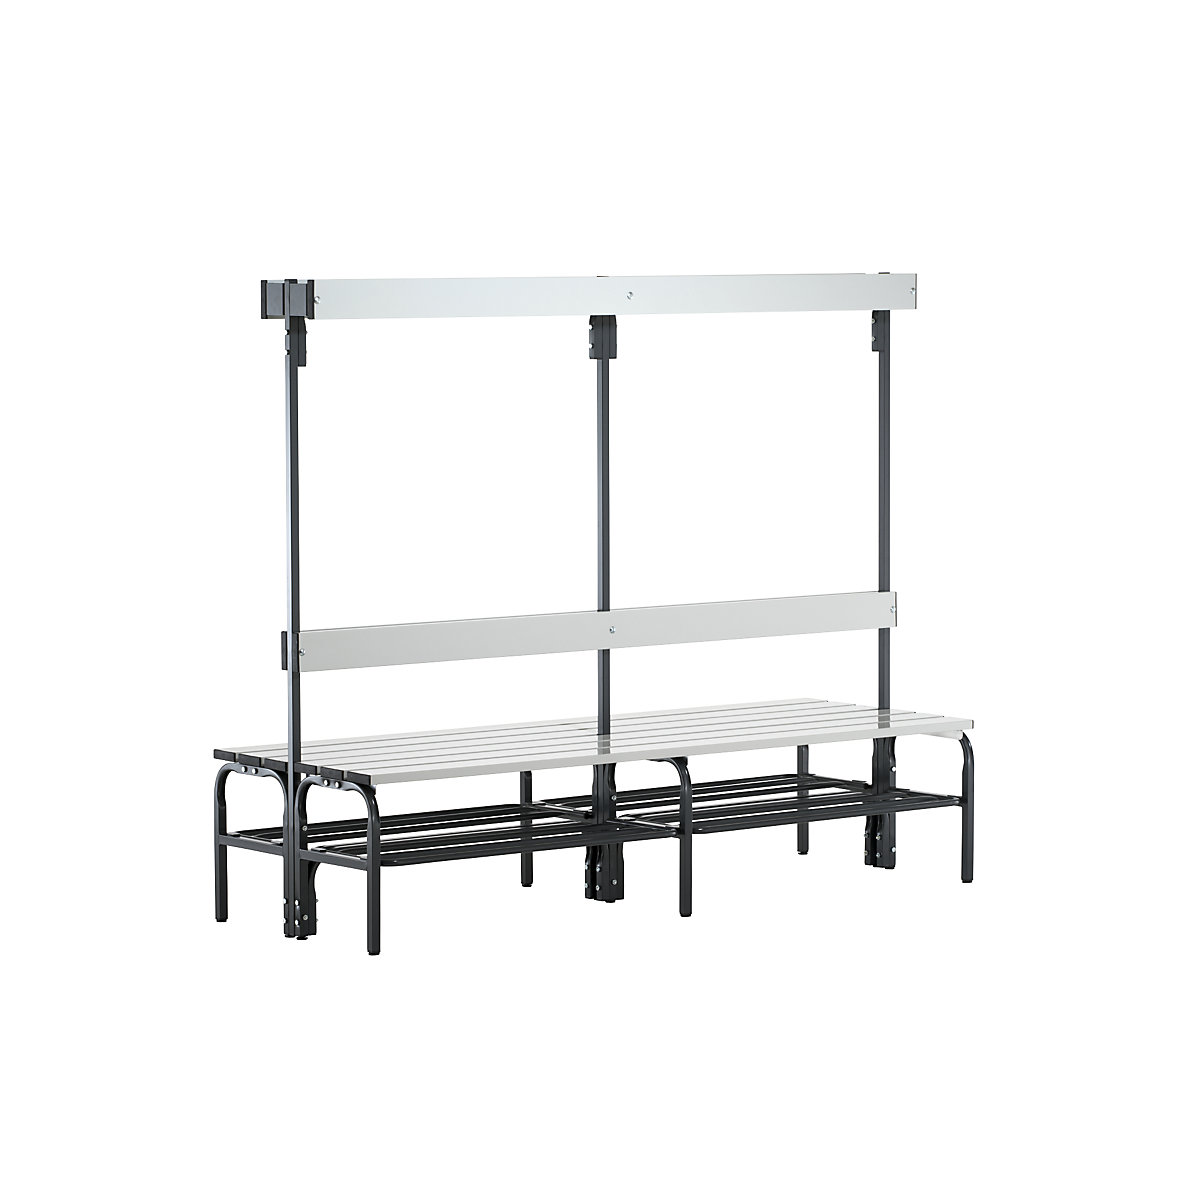 Sypro – Changing room bench with aluminium slats, HxD 1650 x 725 mm, double sided, length 1500 mm, 12 hooks, charcoal